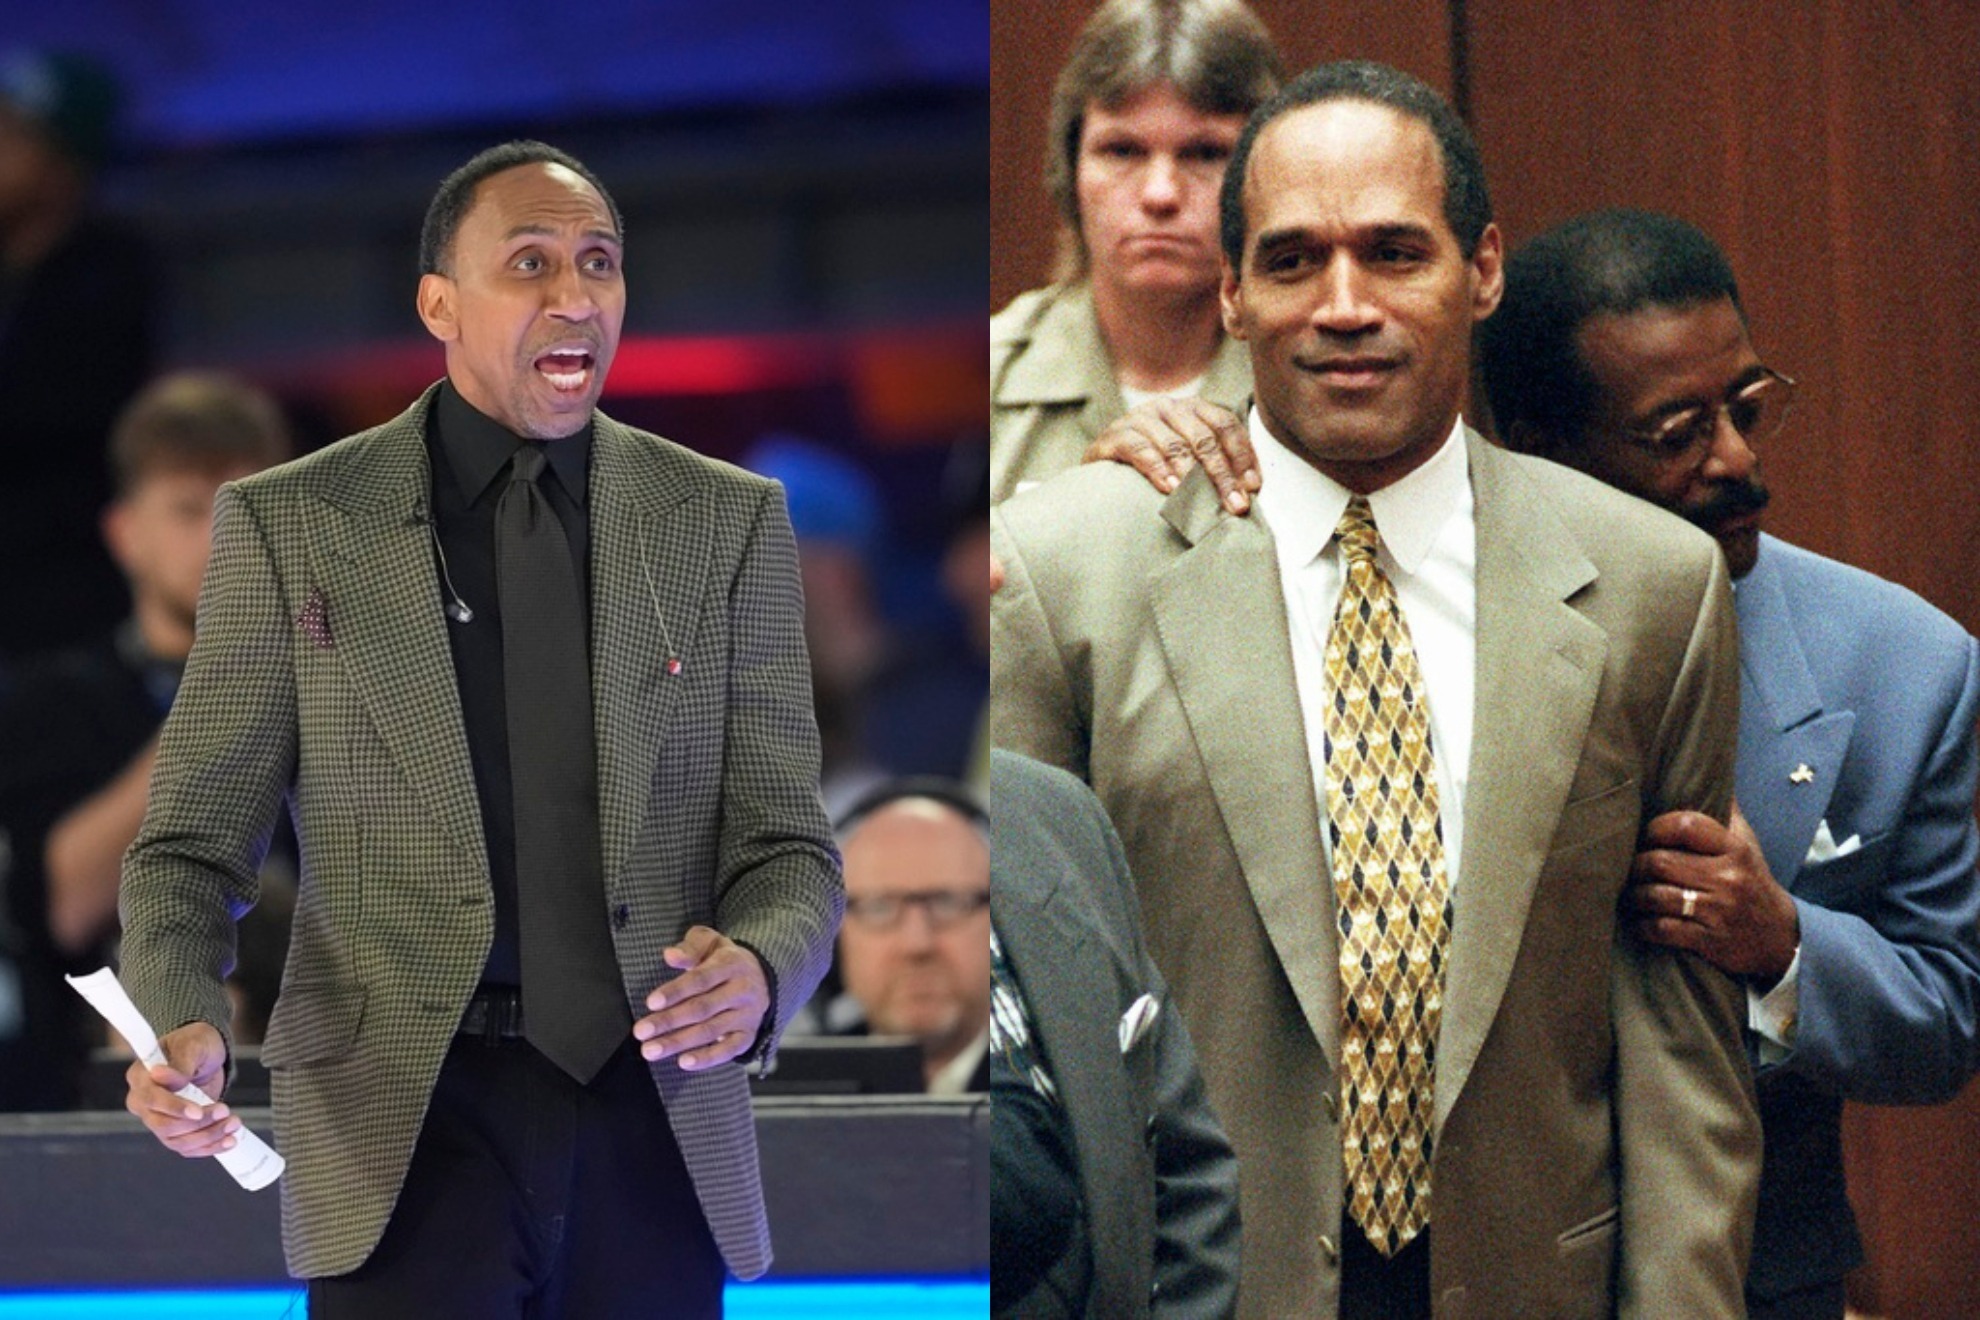 Stephen A. Smith claims he believes O.J. Simpson murdered Nicole Brown Simpson and Ron Goldman in 1994